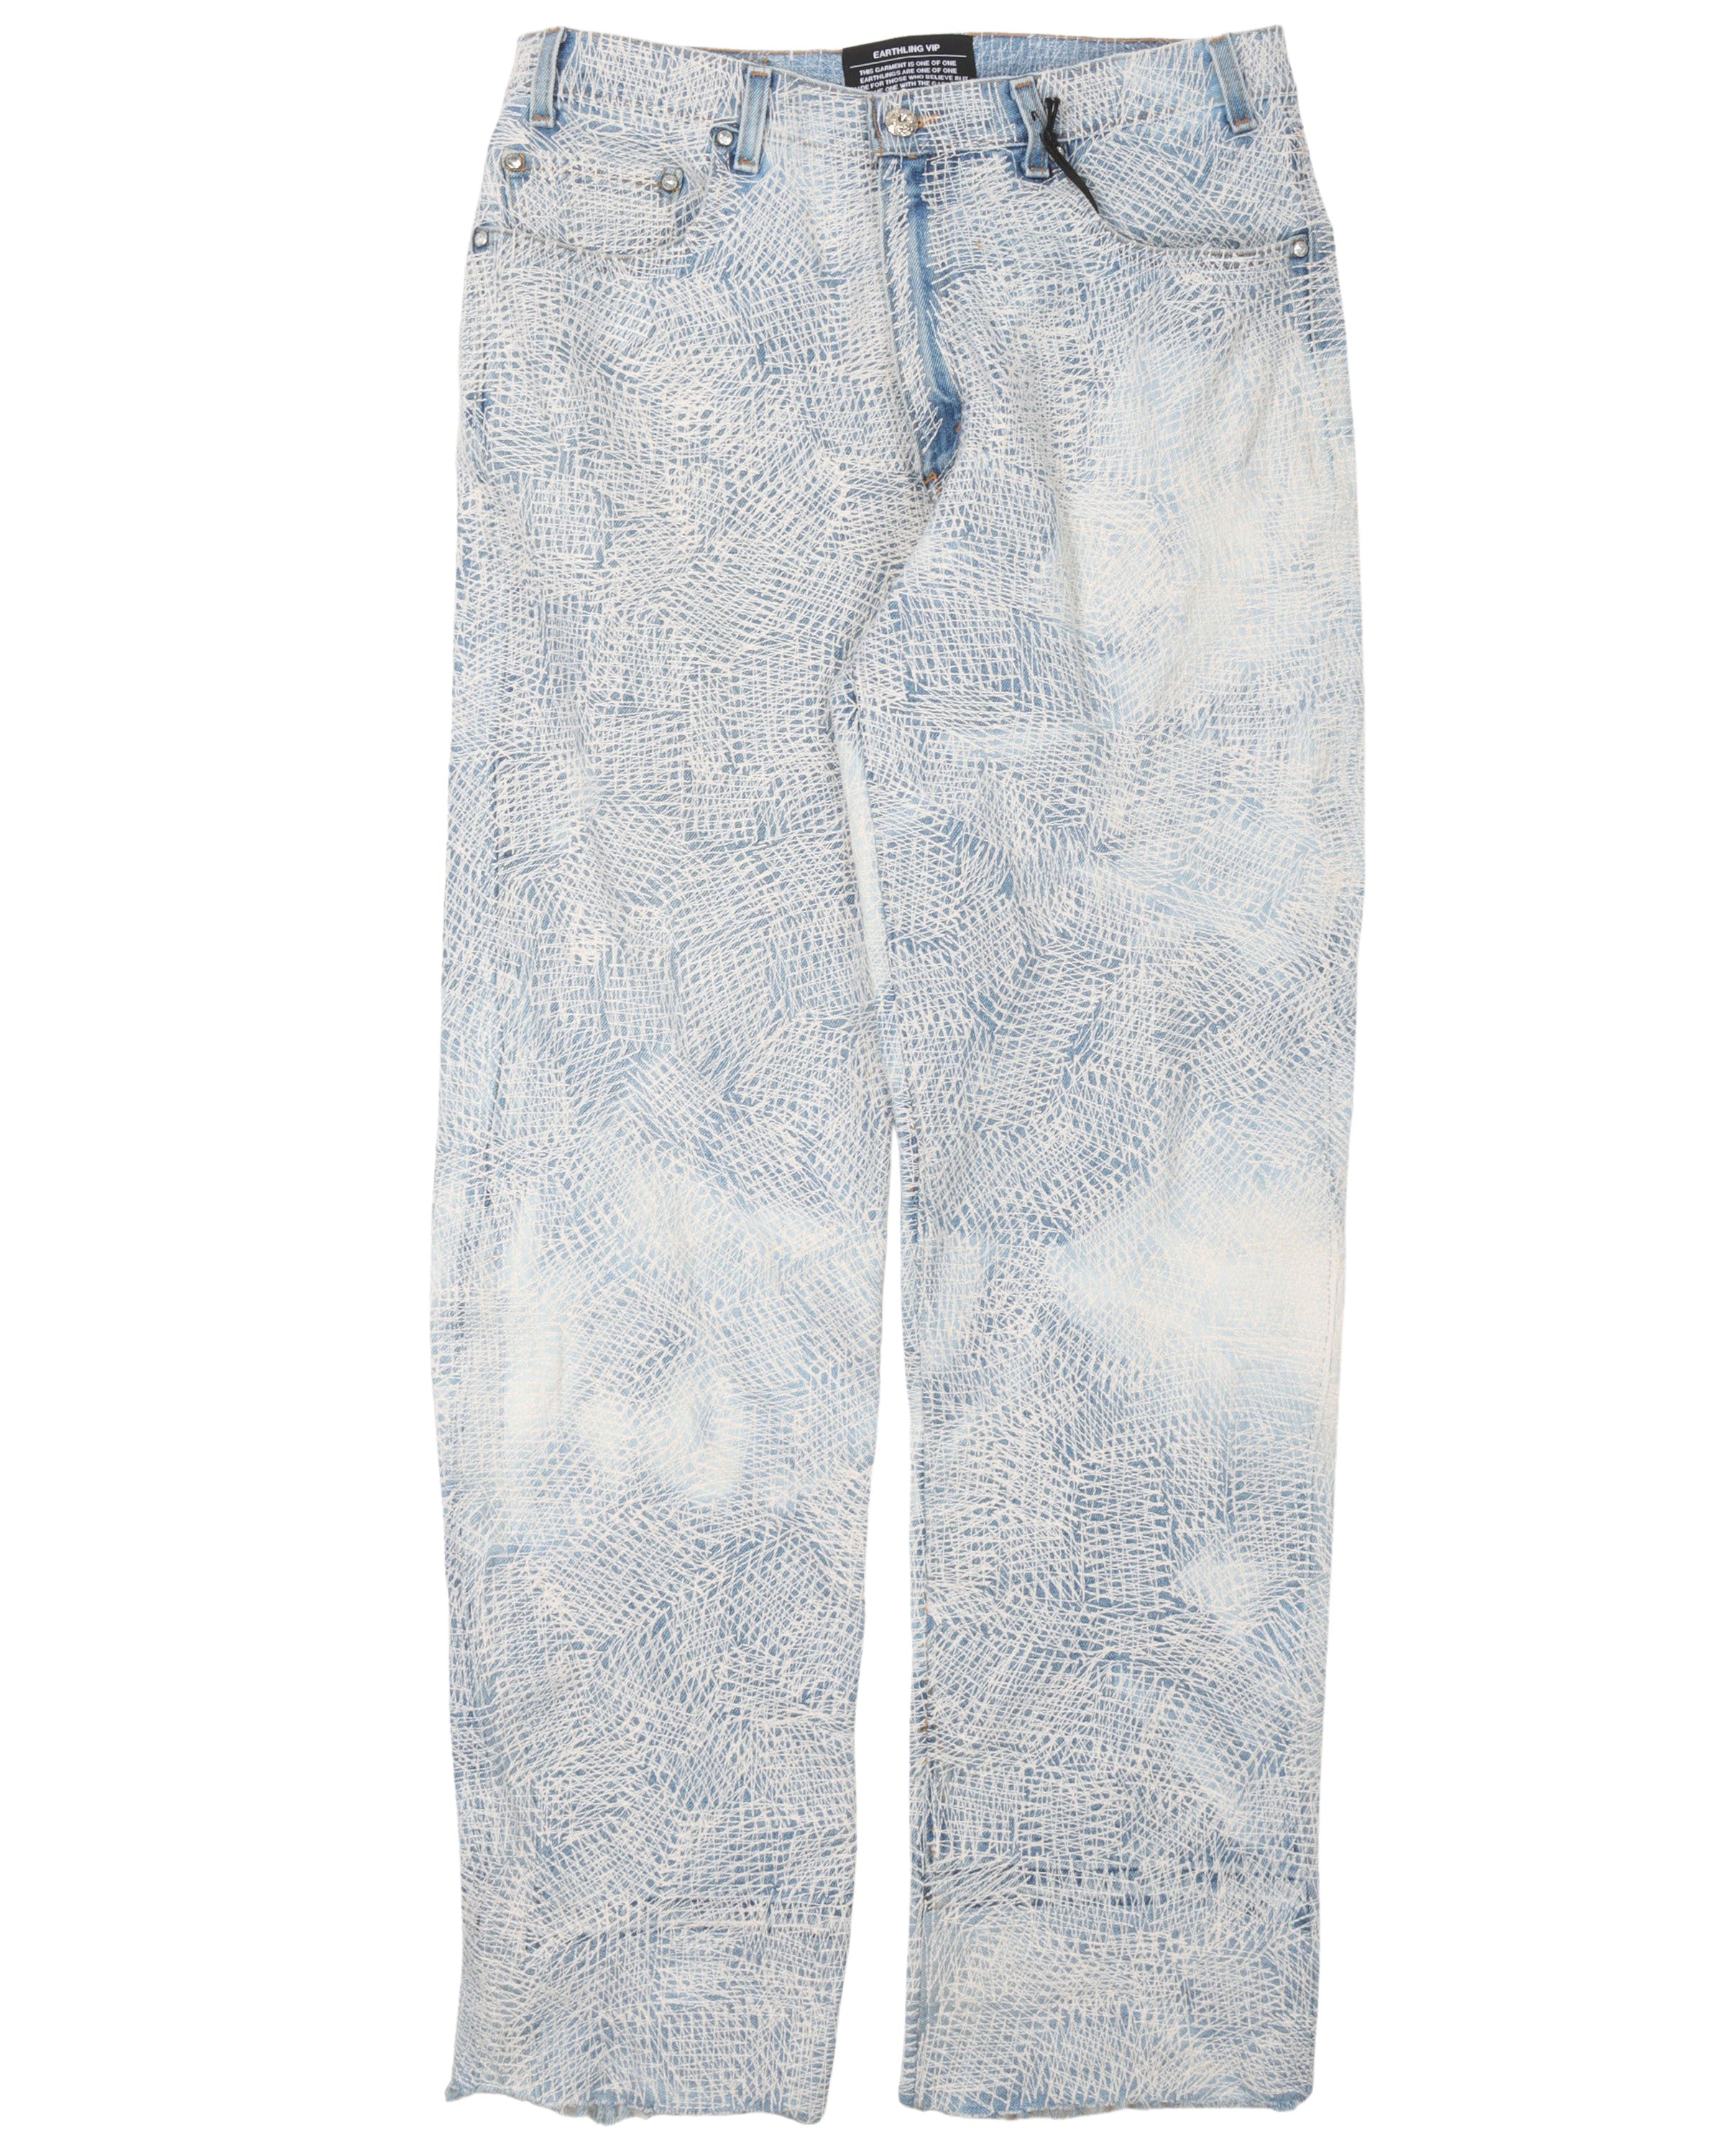 Earthling VIP Circus Stitch White Jeans